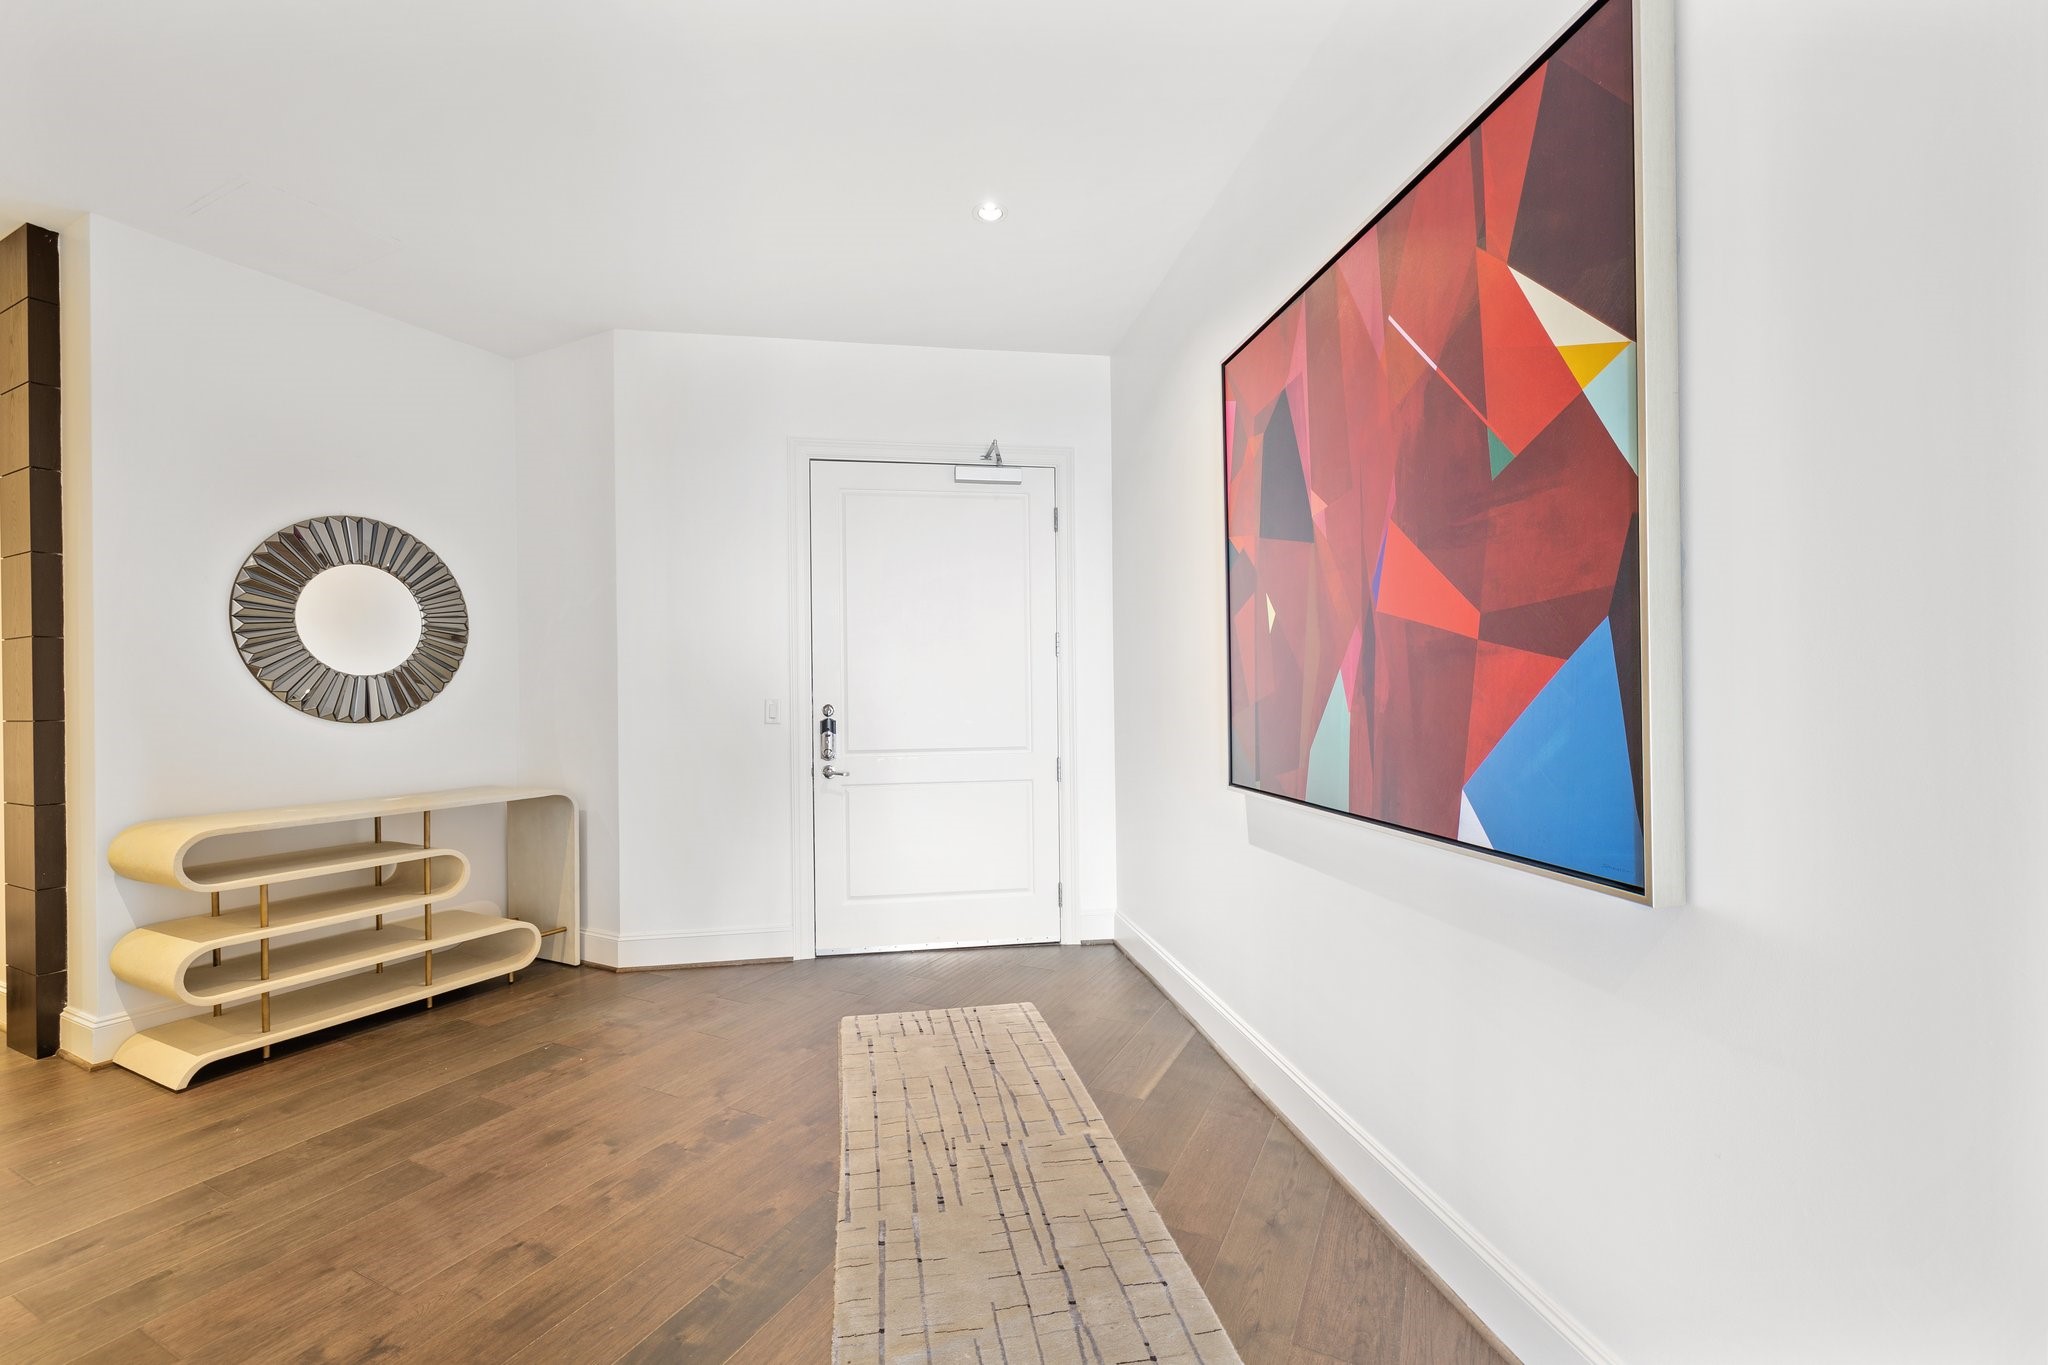 New wood floors span the entire condo, providing a chic contrast to the luminous space and offering a warm welcome to your residence.